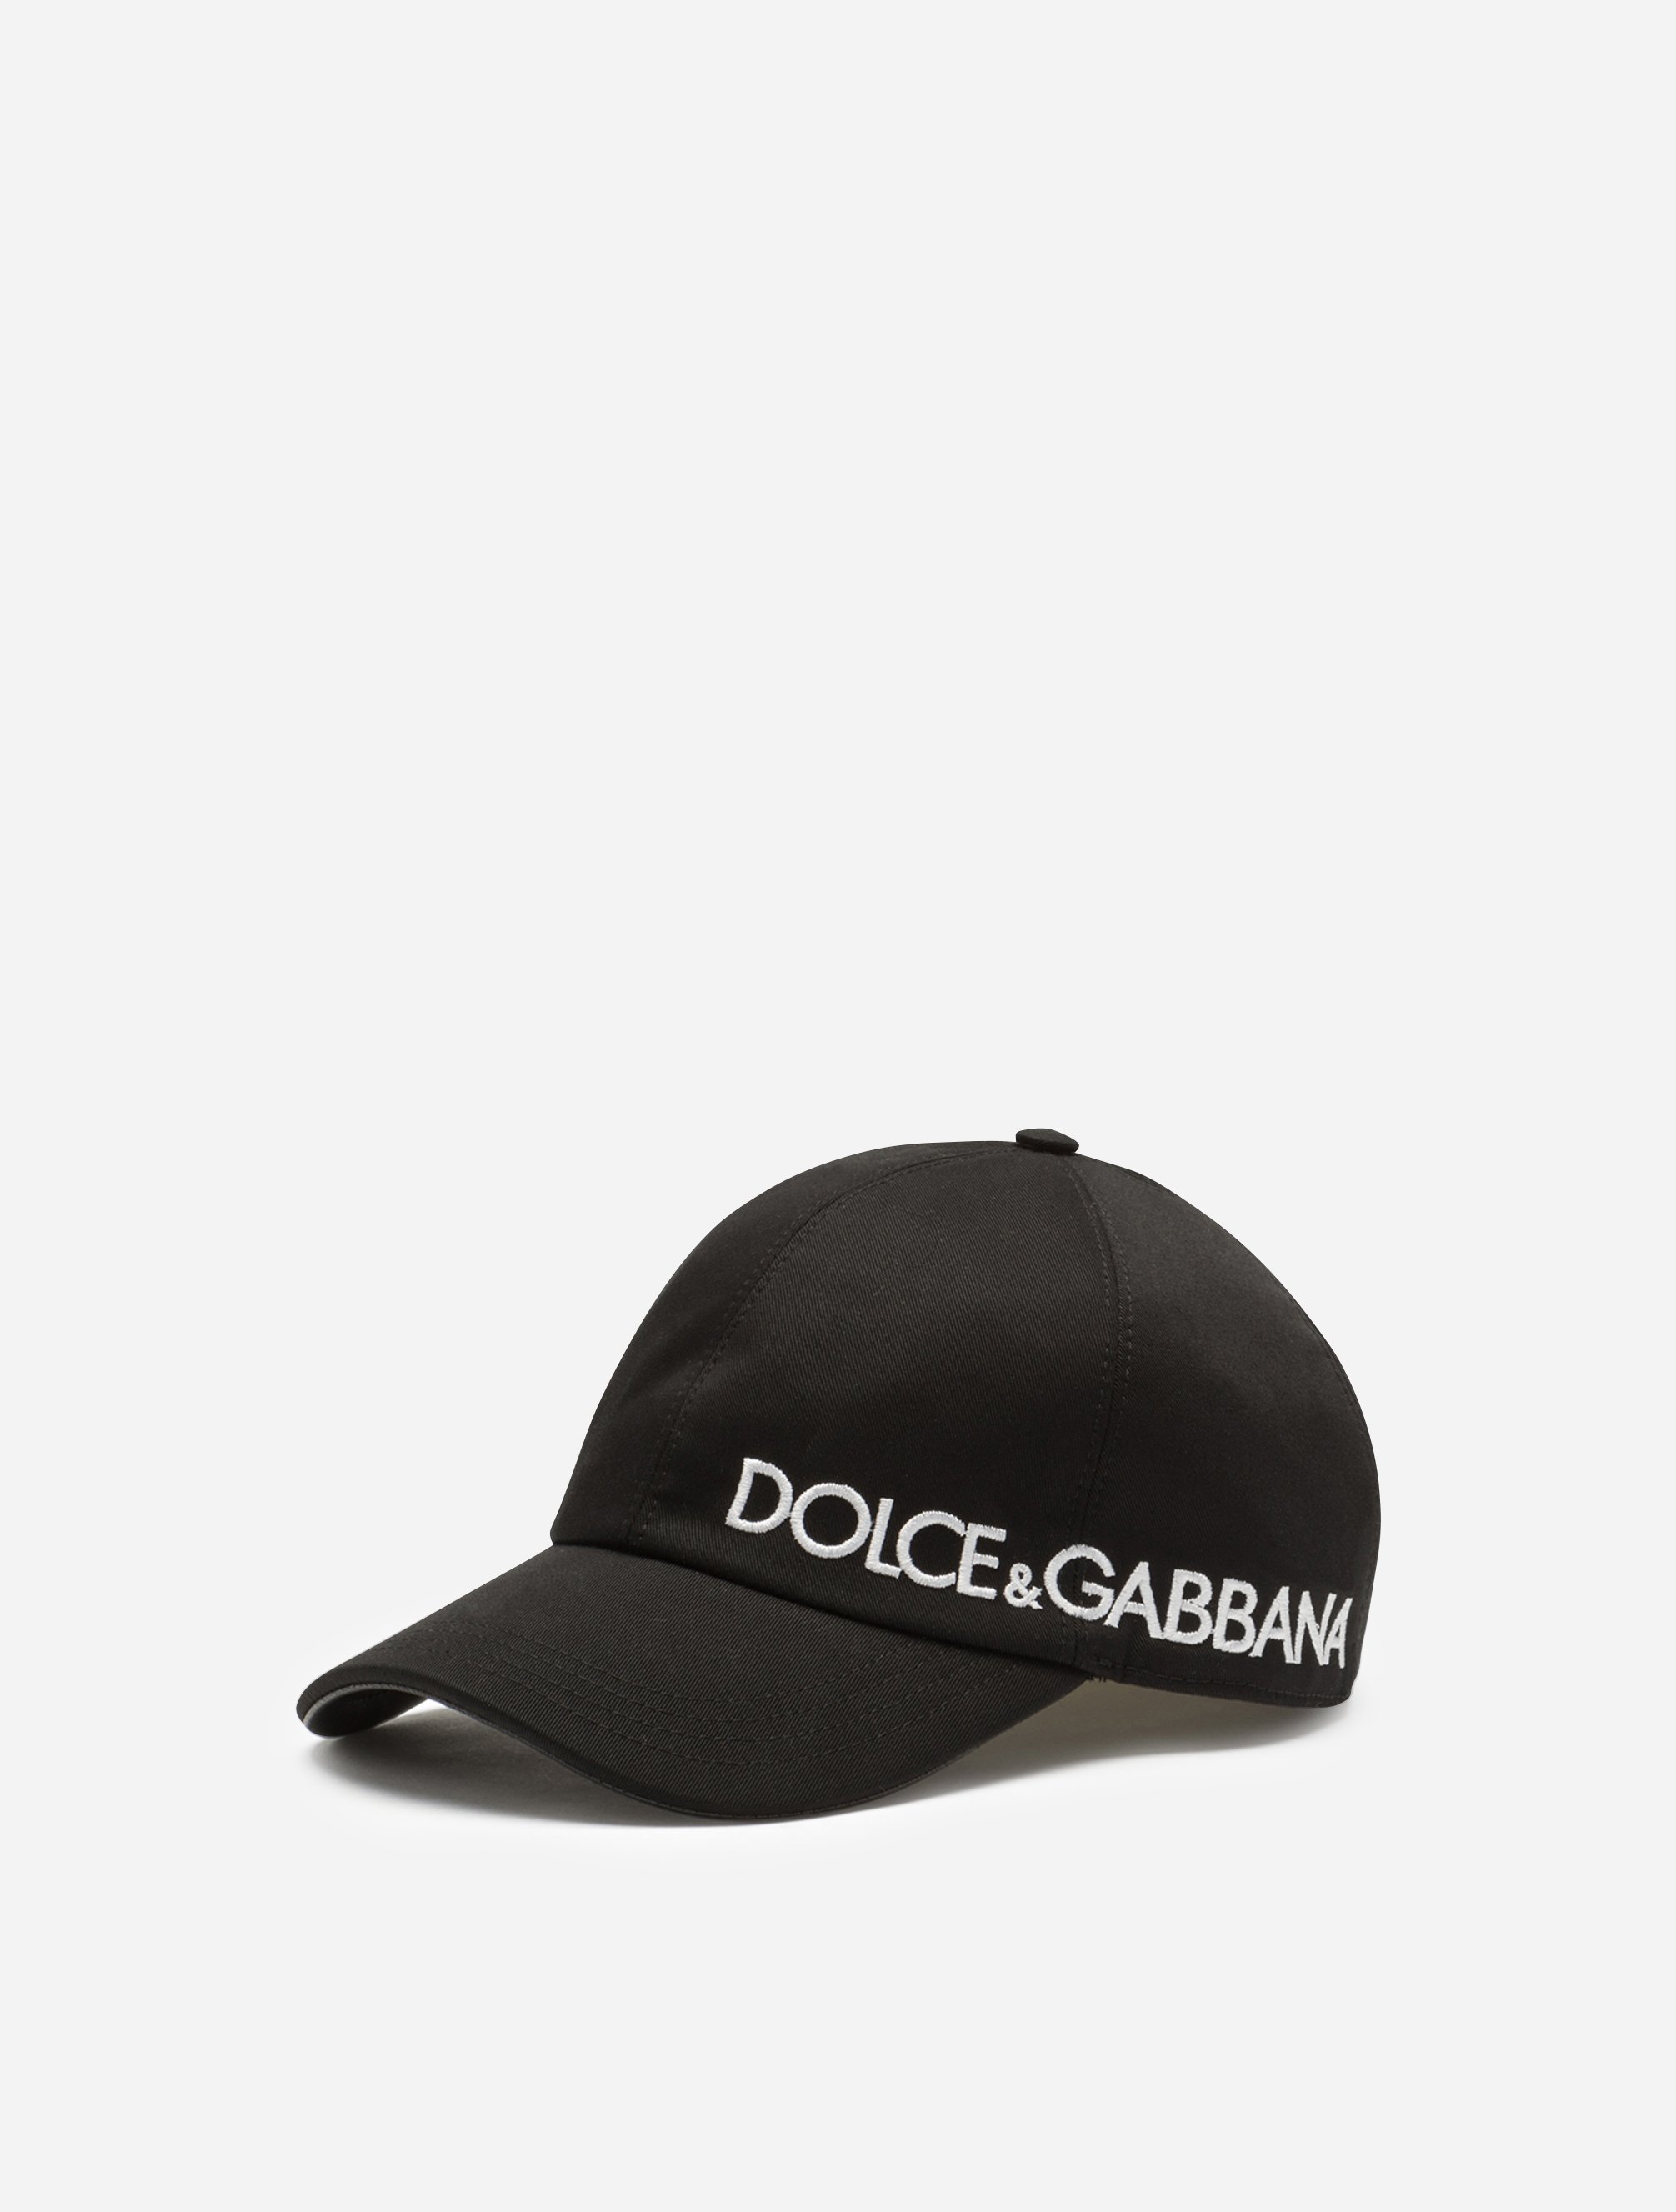 Dolce&Gabbana baseball cap with embroidery in Black